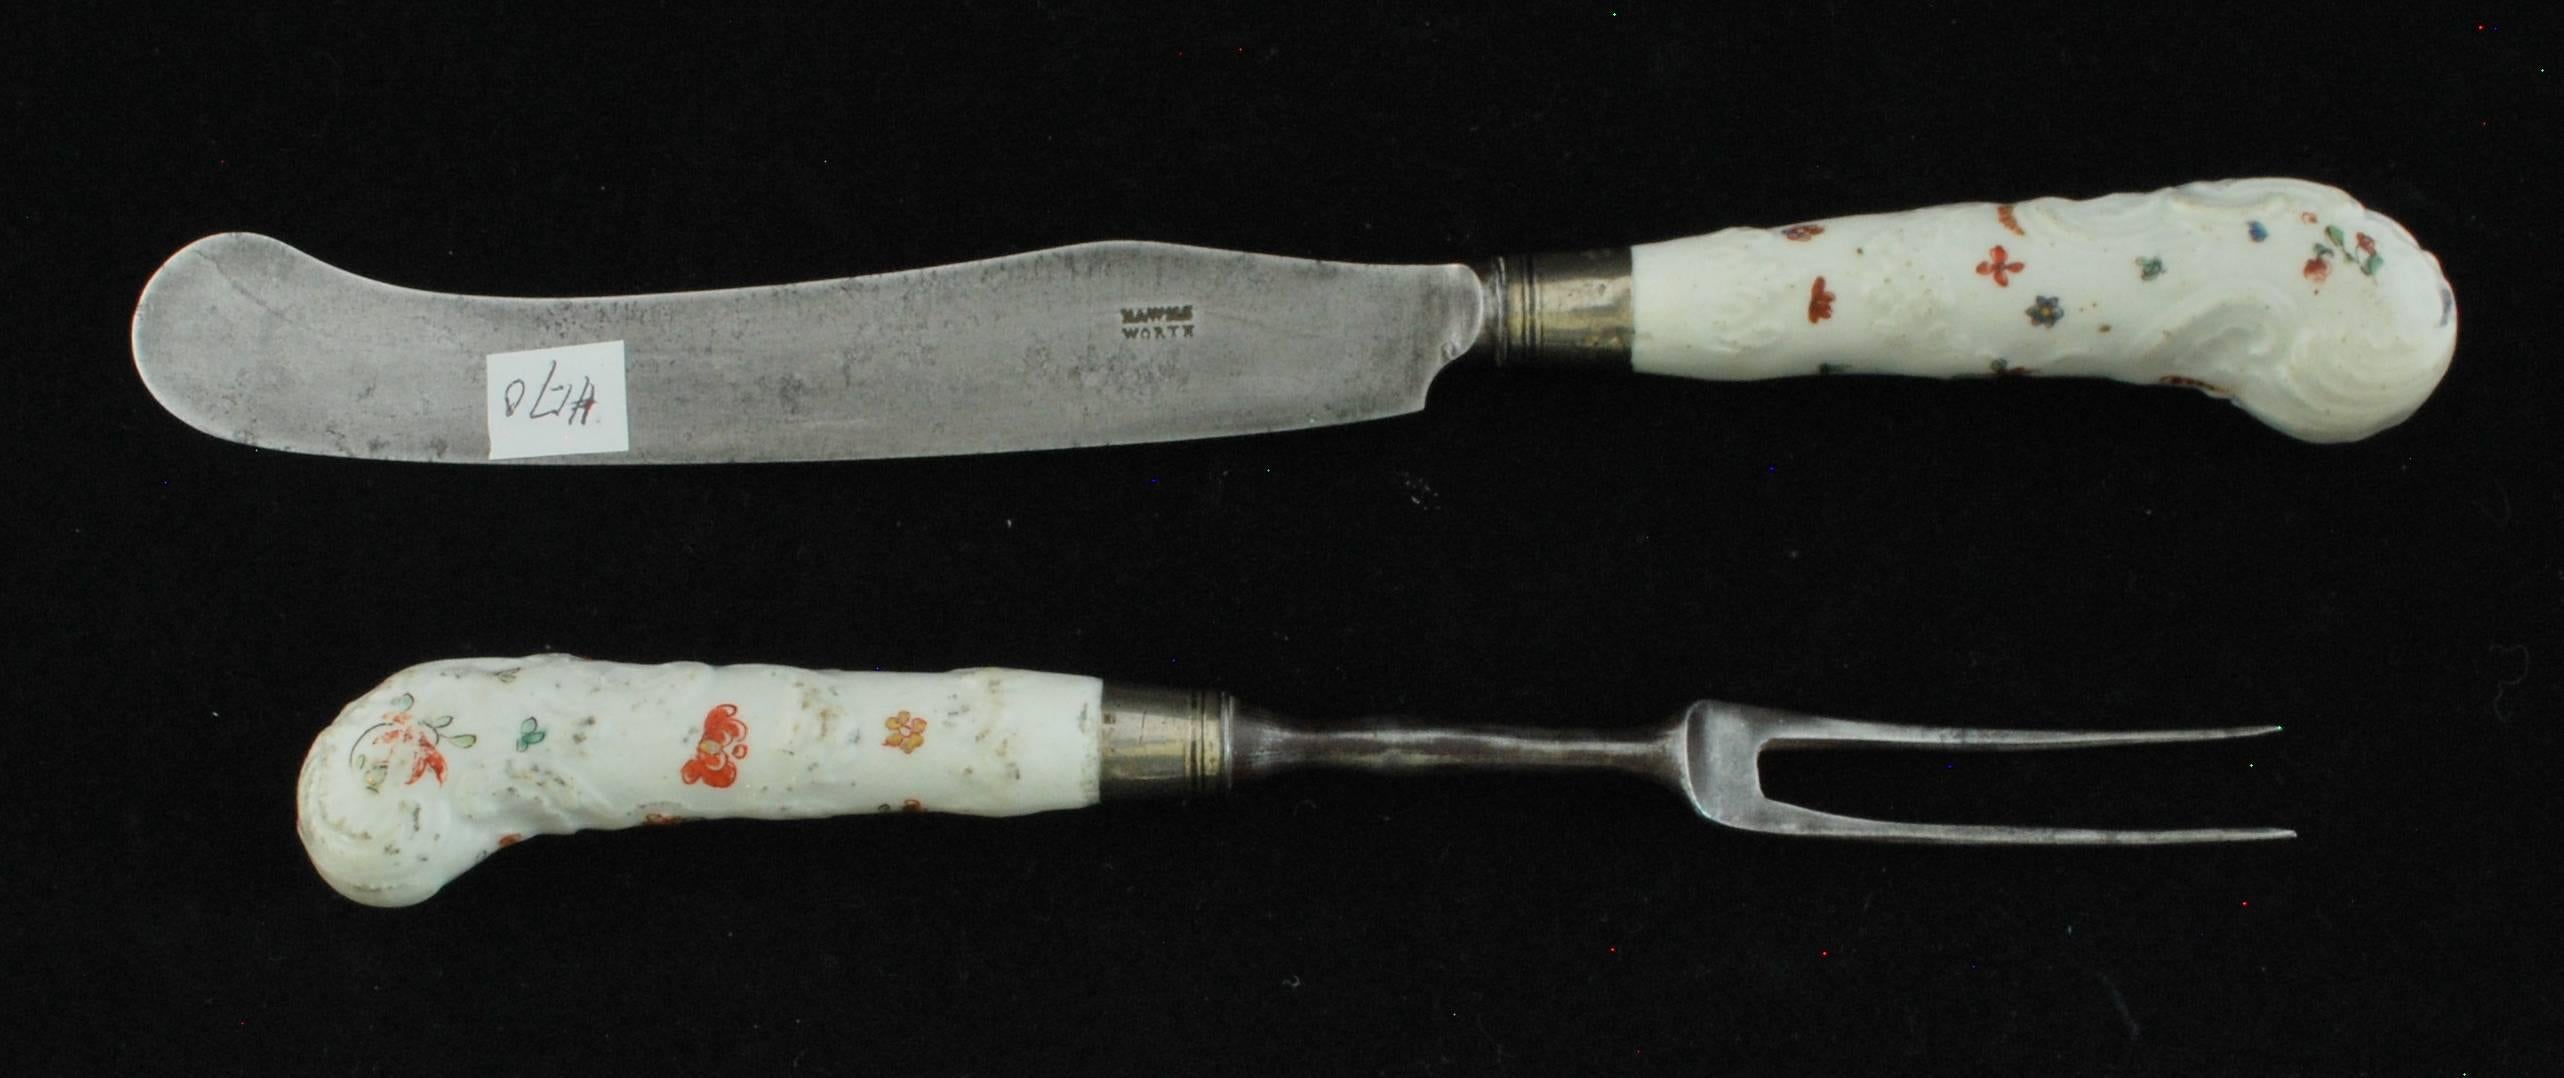 An unsually early set of handles with original steel tines and blade. Pistol grip form moulded with acanthus scrolls, leaves and swags and painted with indianische Blumen in a Kakiemon palette of iron-red, blue, green and black with gilding on